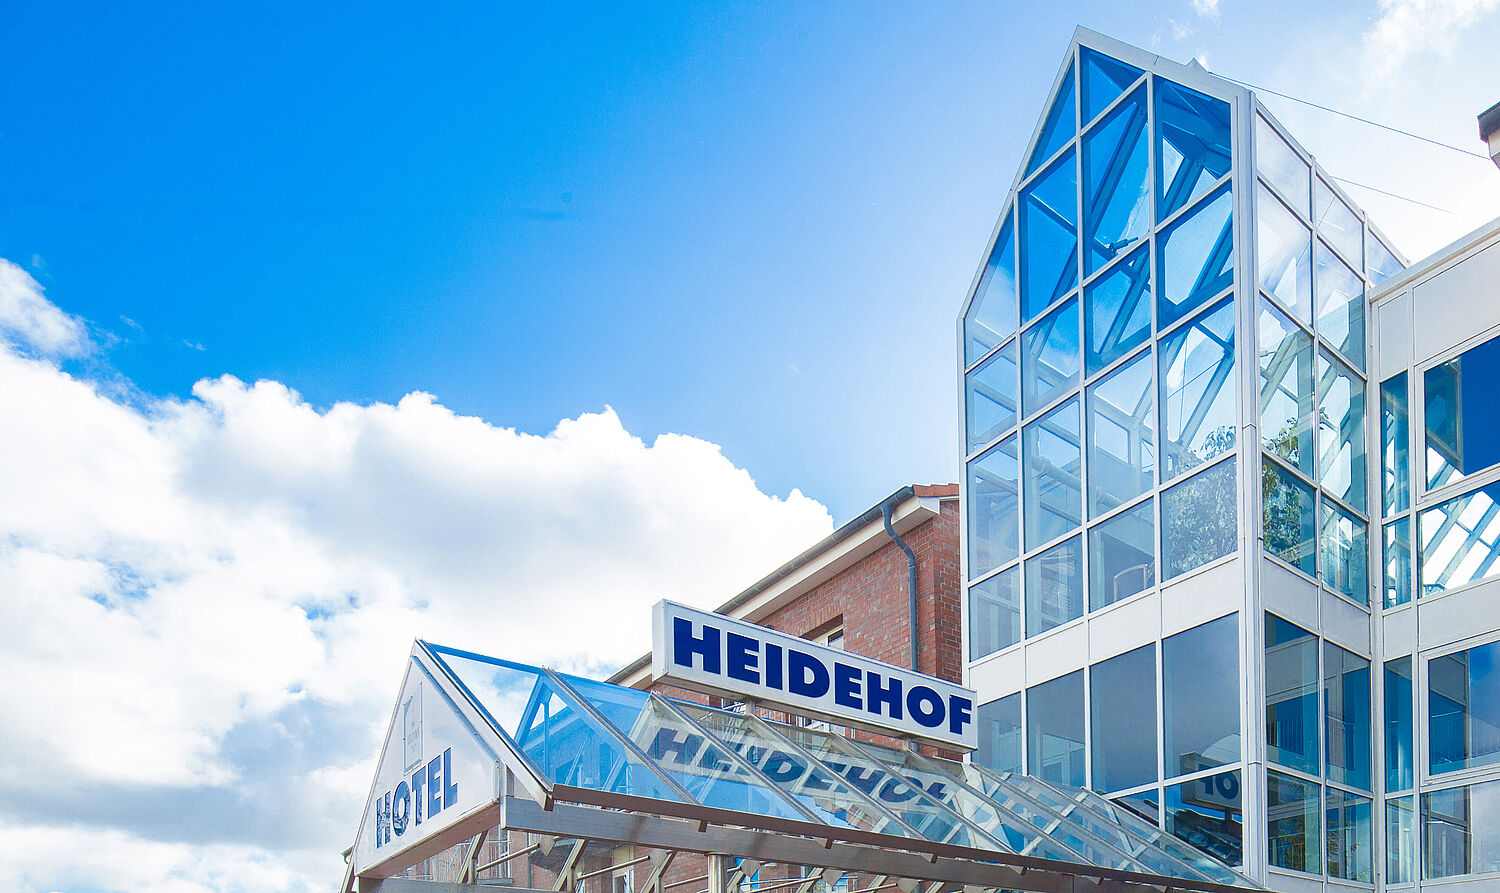 Hotel Heidehof In Budelsdorf Near Rendsburg For Your Holiday Or As A Conference Hotel